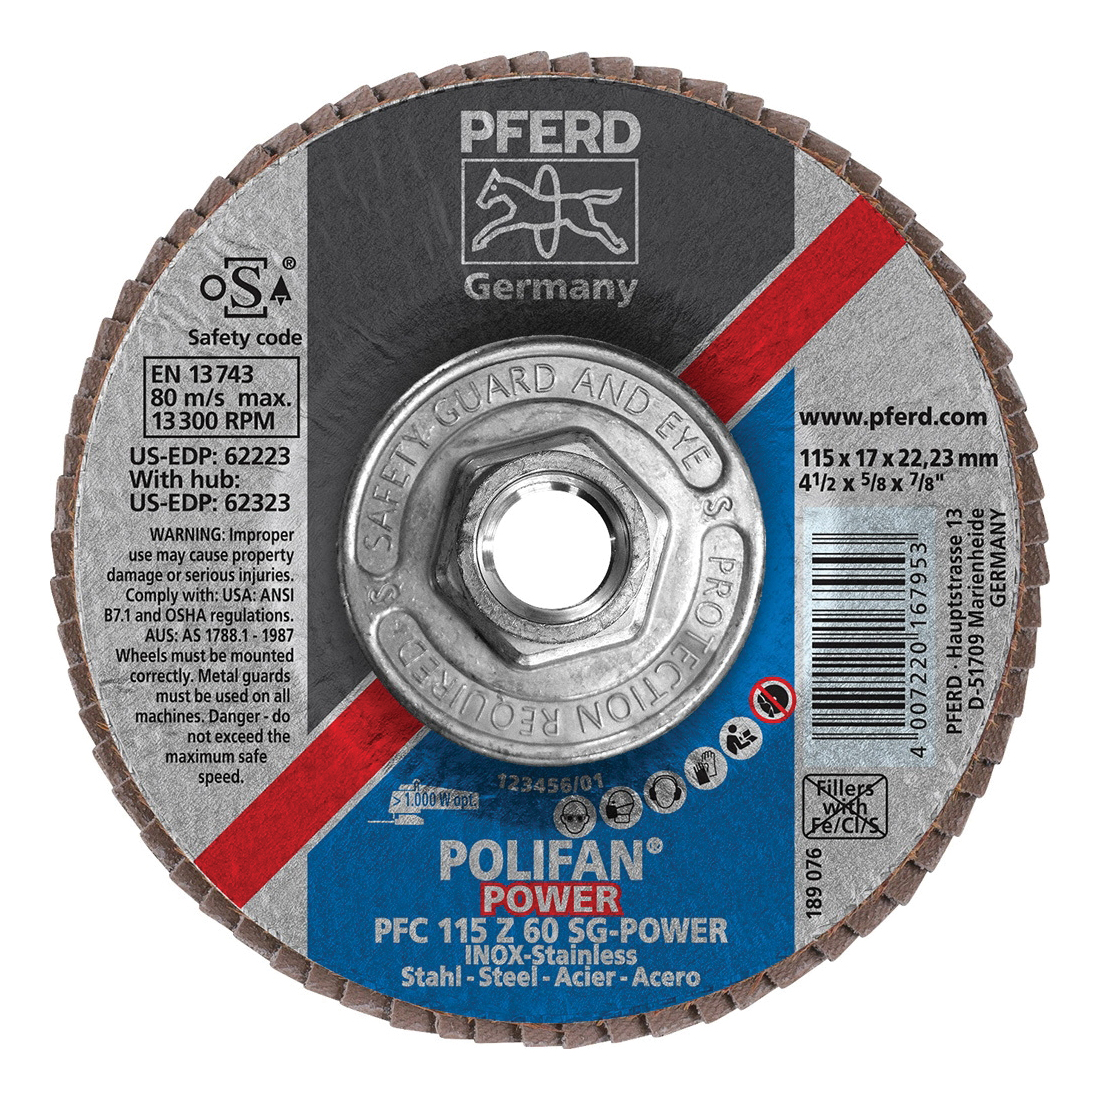 PFERD Polifan® 62323 Performance Line SG Z-Power Threaded Coated Abrasive Flap Disc, 4-1/2 in Dia, 60 Grit, Zirconia Alumina Abrasive, Type 29 Conical Disc